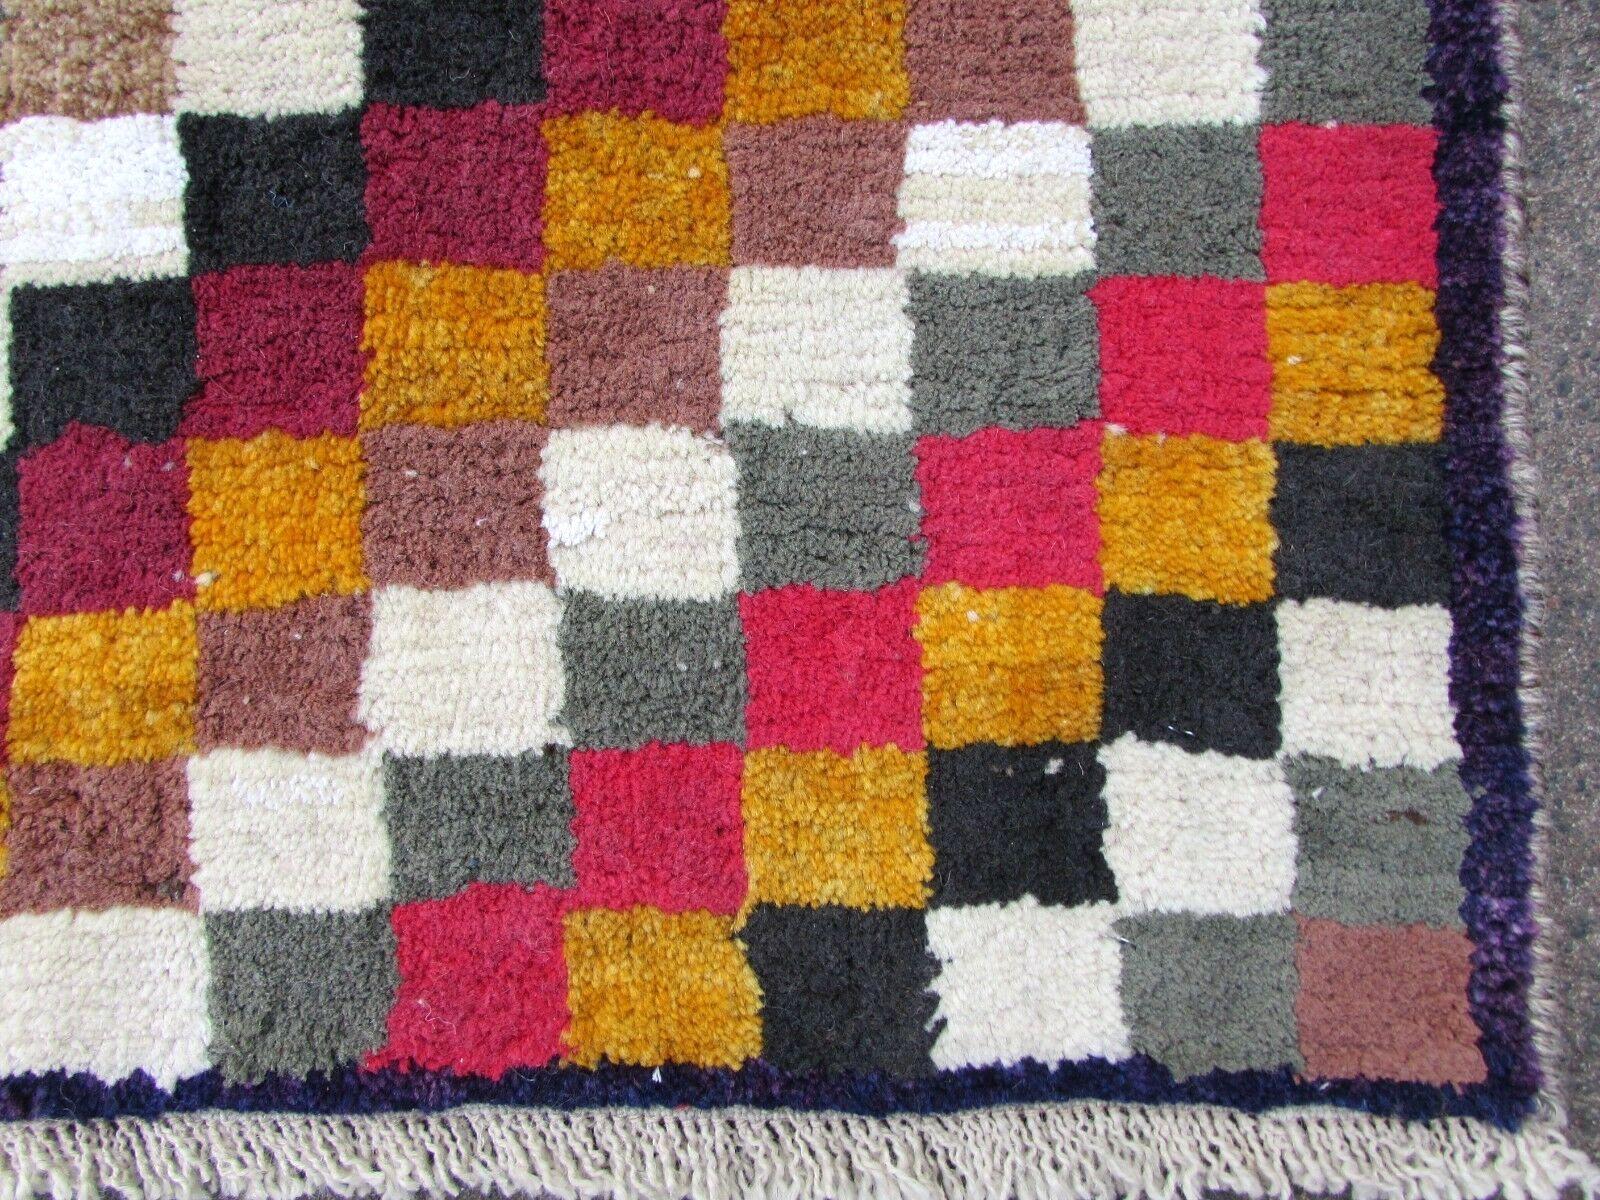 Handmade vintage Gabbeh rug in colorful wool. The rug is from the end of the 20th century in original good condition.

- Condition: original good,

- circa: 1970s,

- Size: 2.7' x 4.4' (83cm x 135cm),

- Material: wool,

- Country of